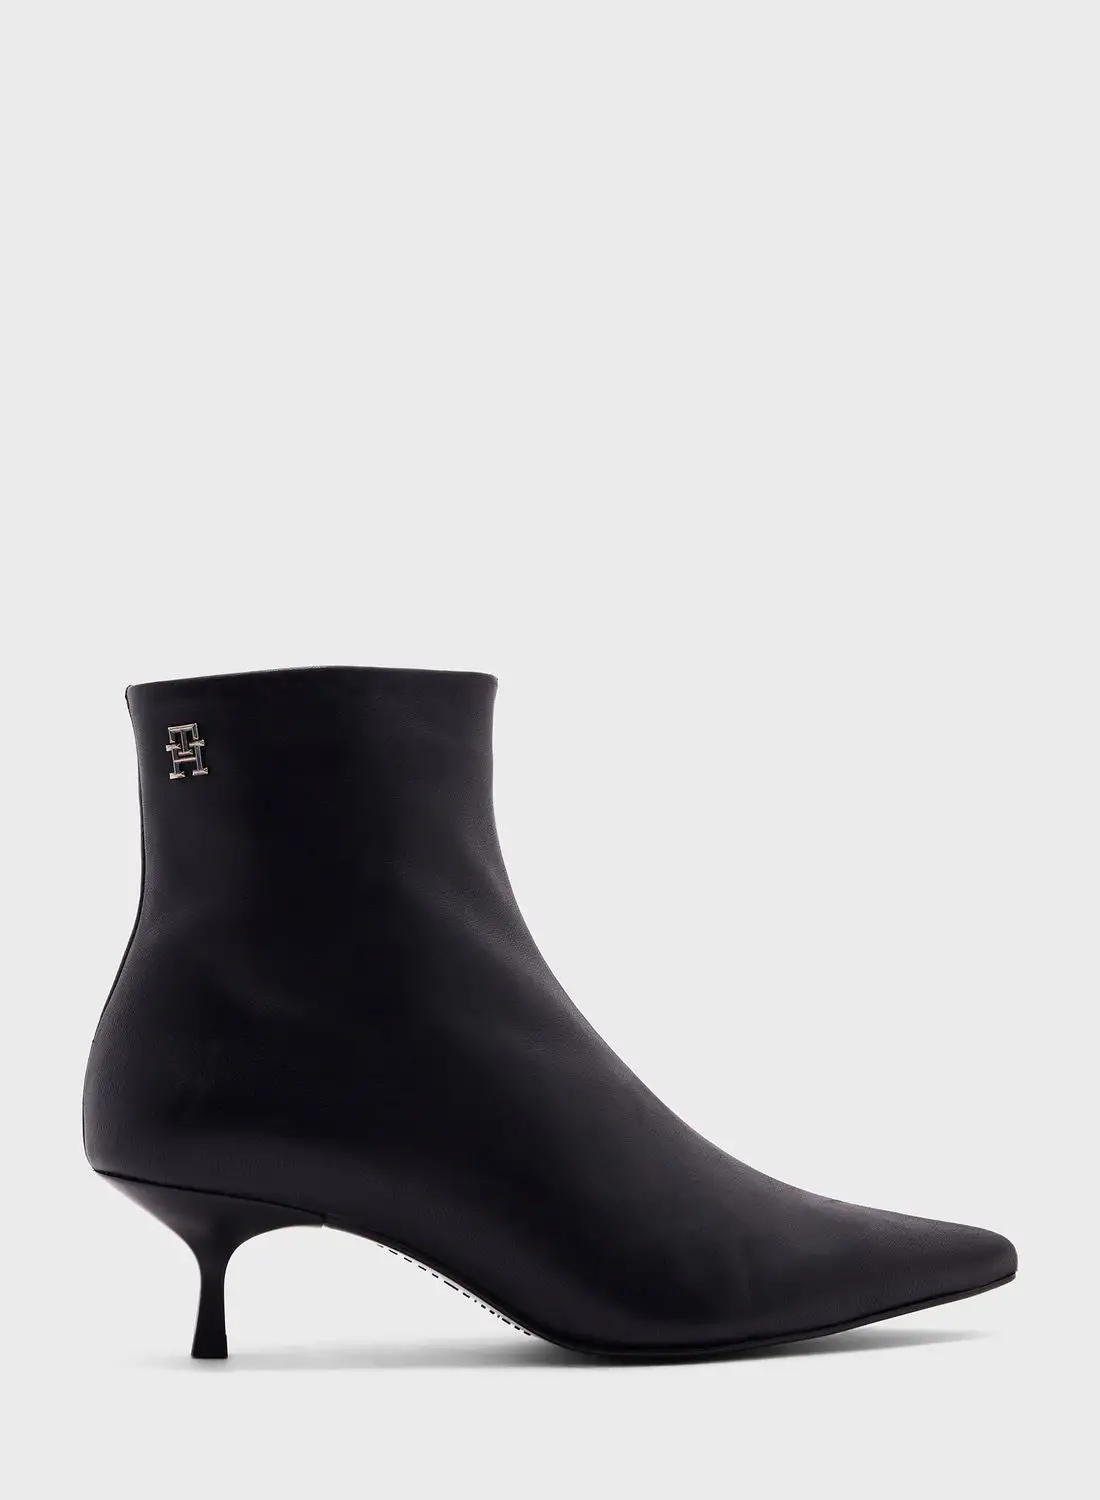 TOMMY HILFIGER Pointed Toe Ankle Boots